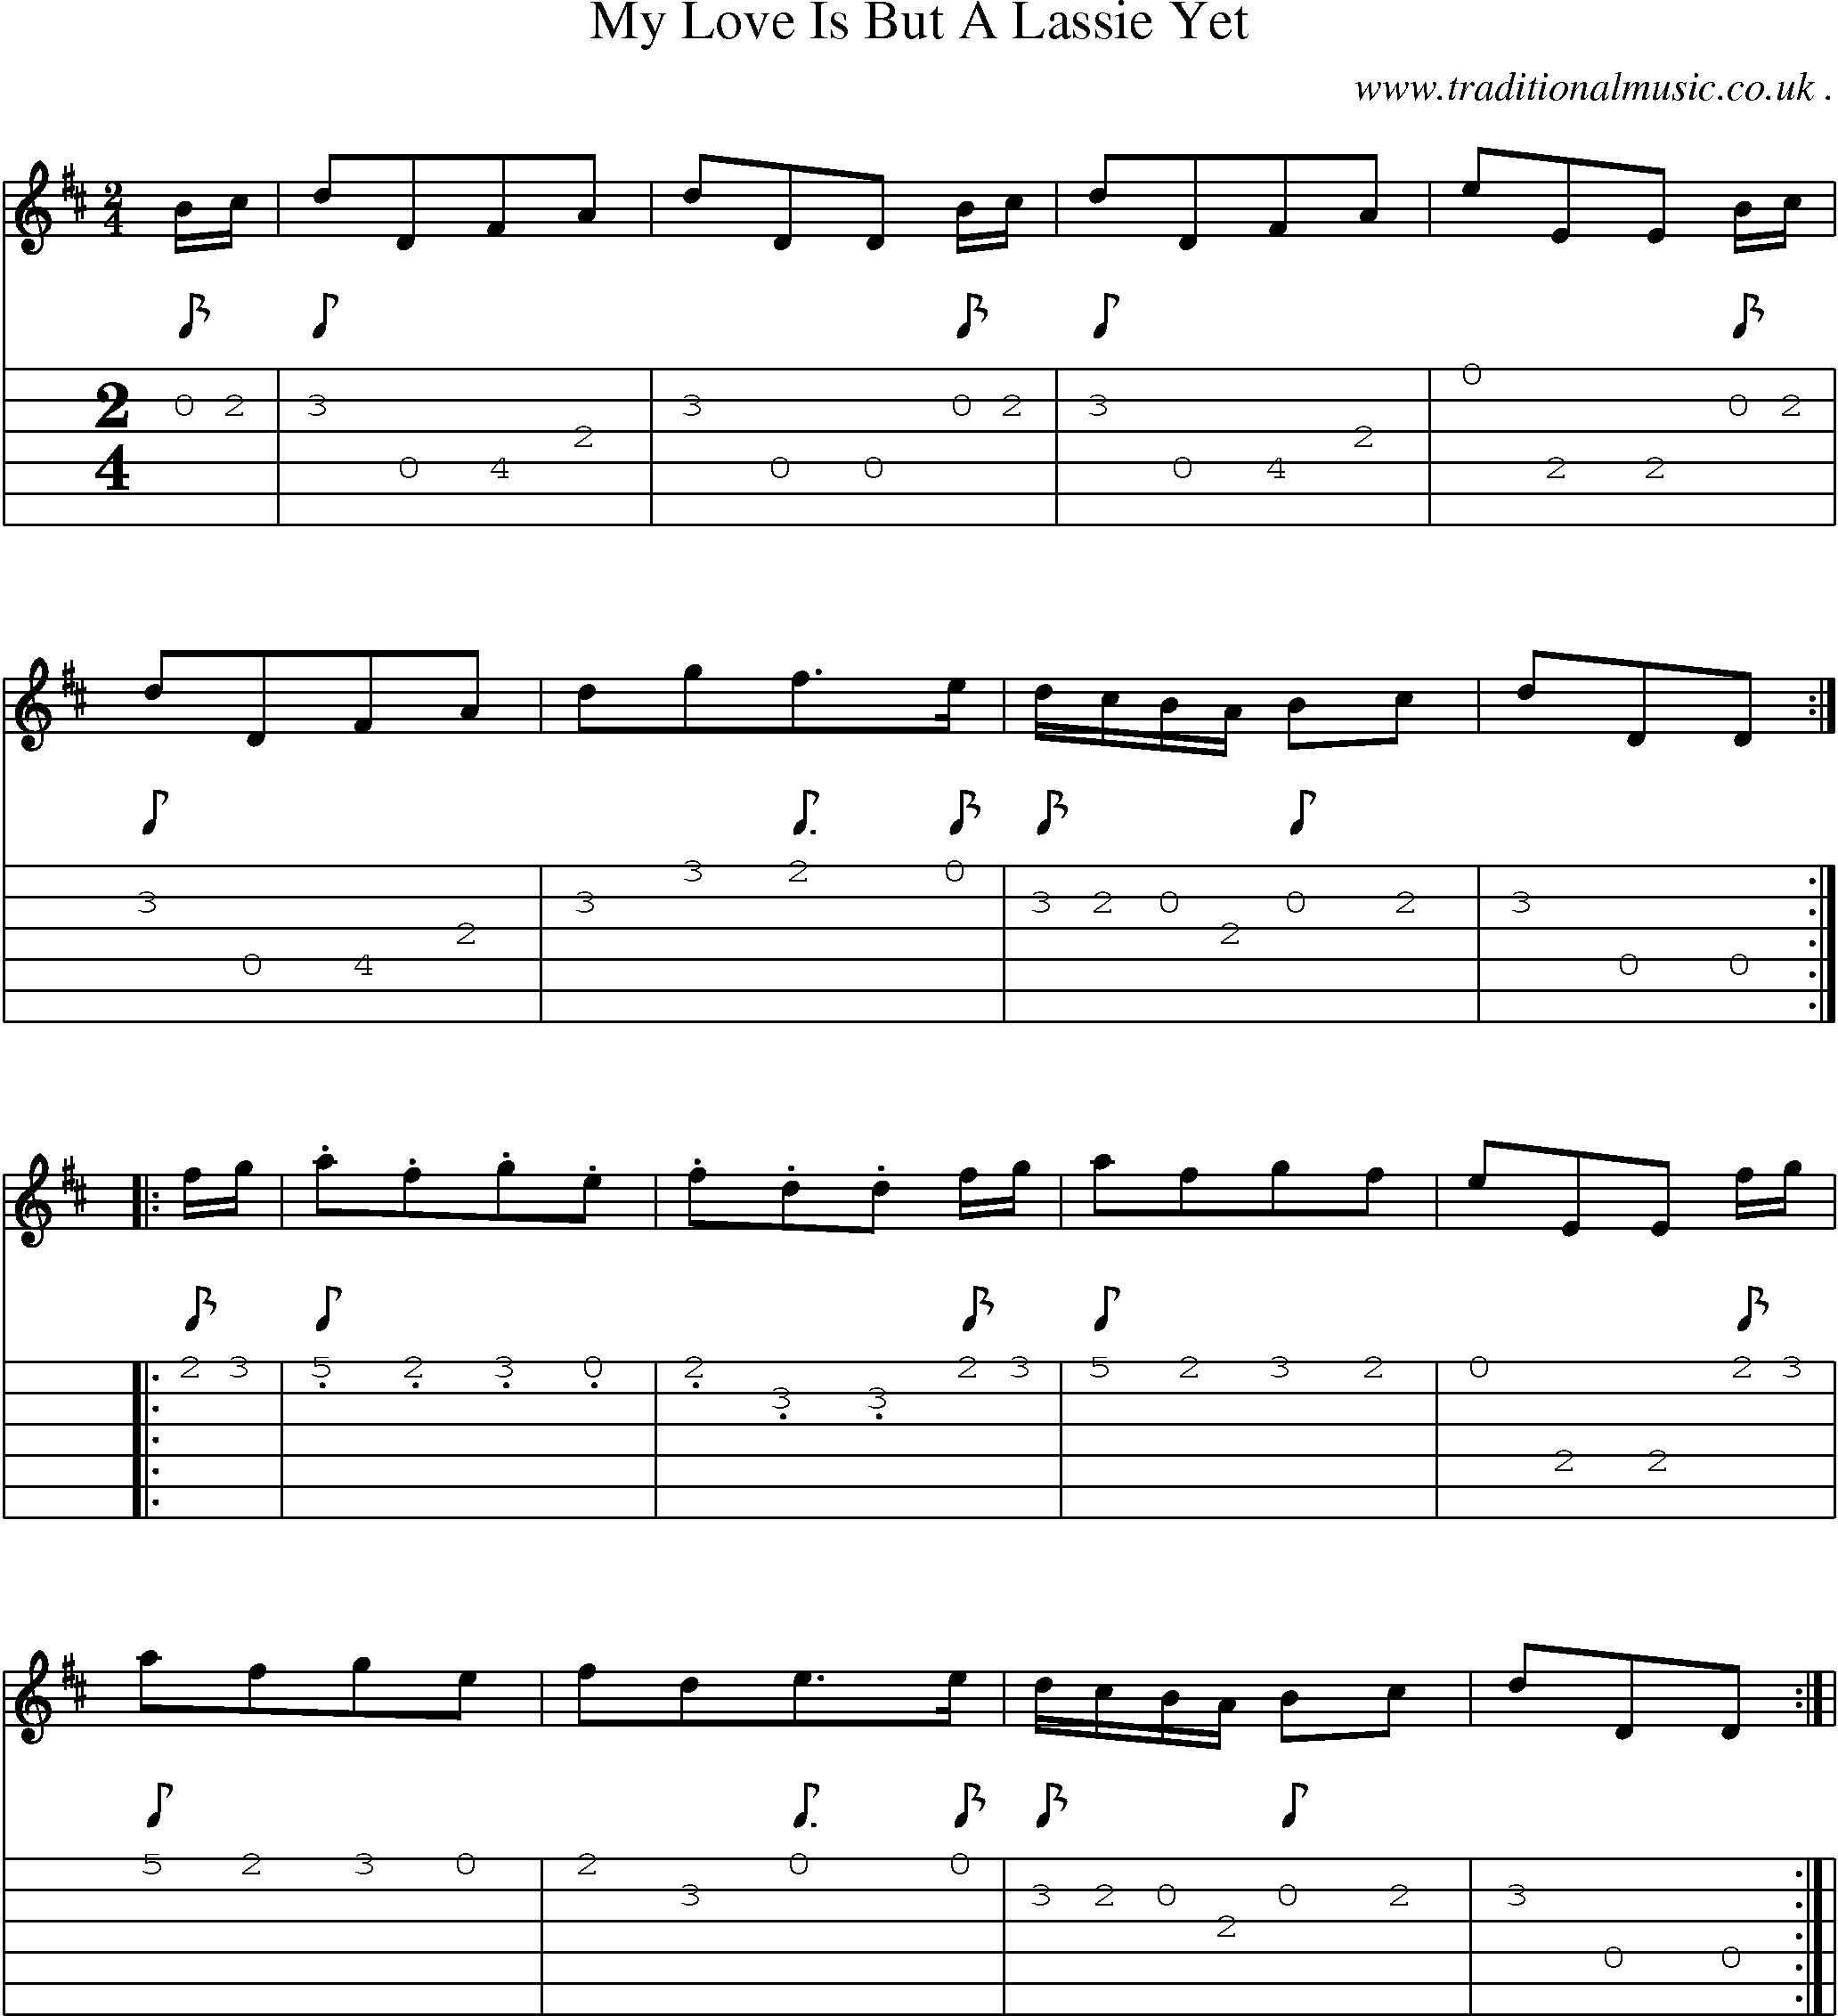 Sheet-Music and Guitar Tabs for My Love Is But A Lassie Yet